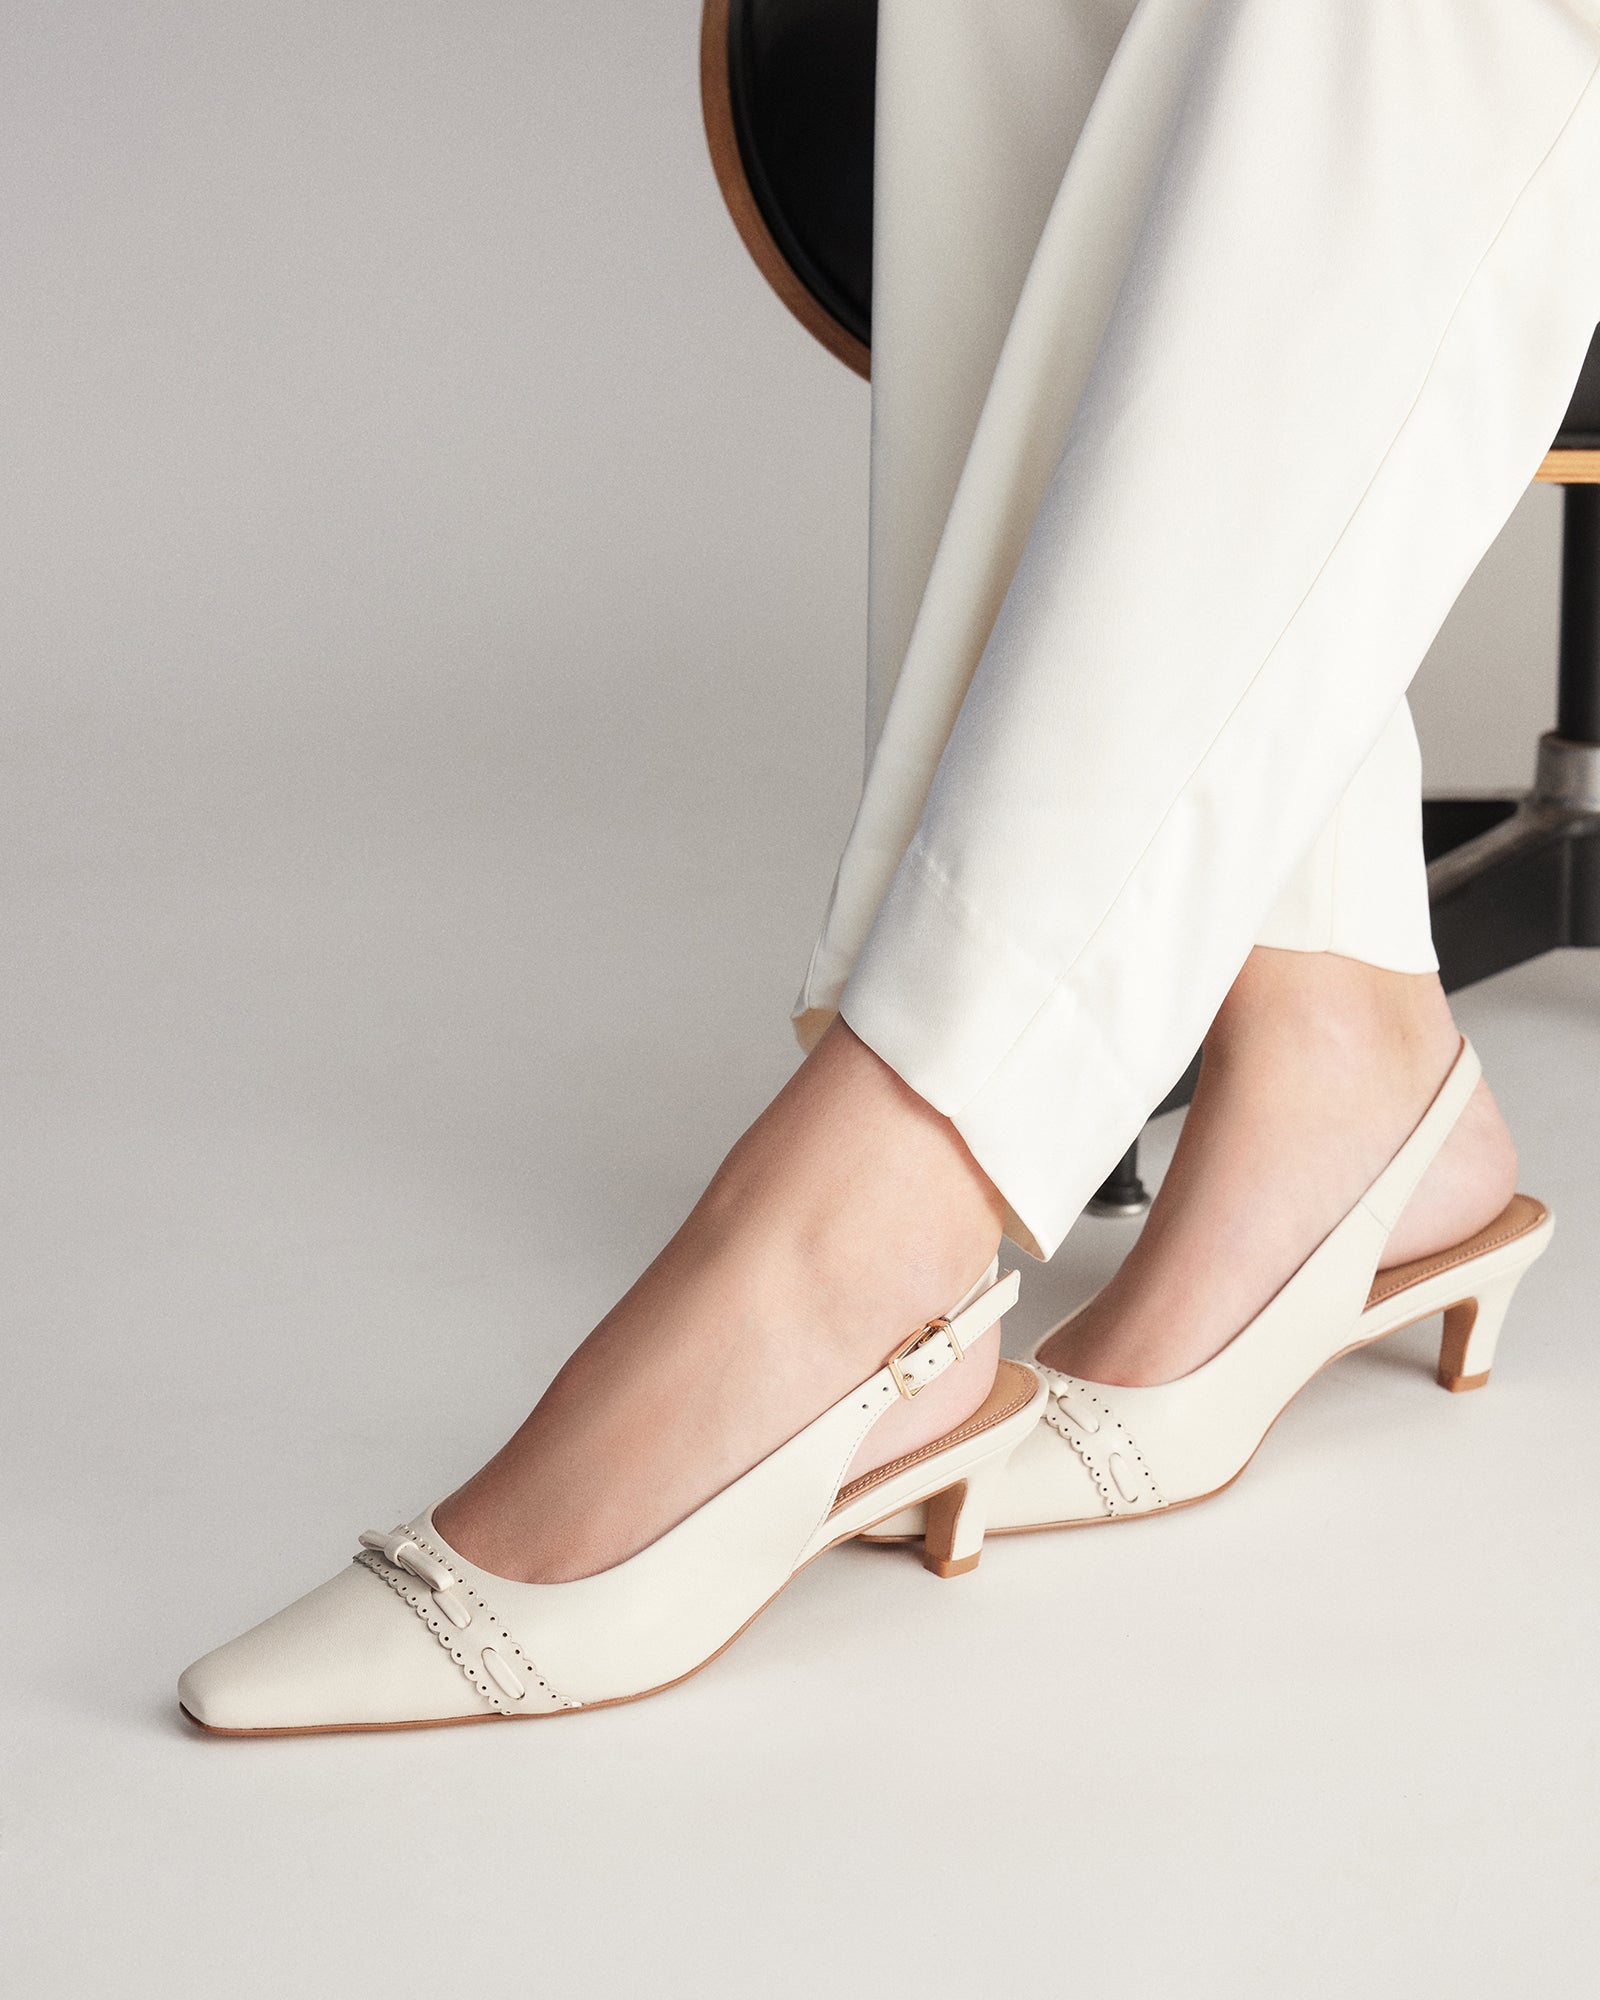 The White Pole Women's Block Heel Pump Shoes Bellies for Party and Formal  Occasions Off White | CIRCLE ONE INDUSTRY